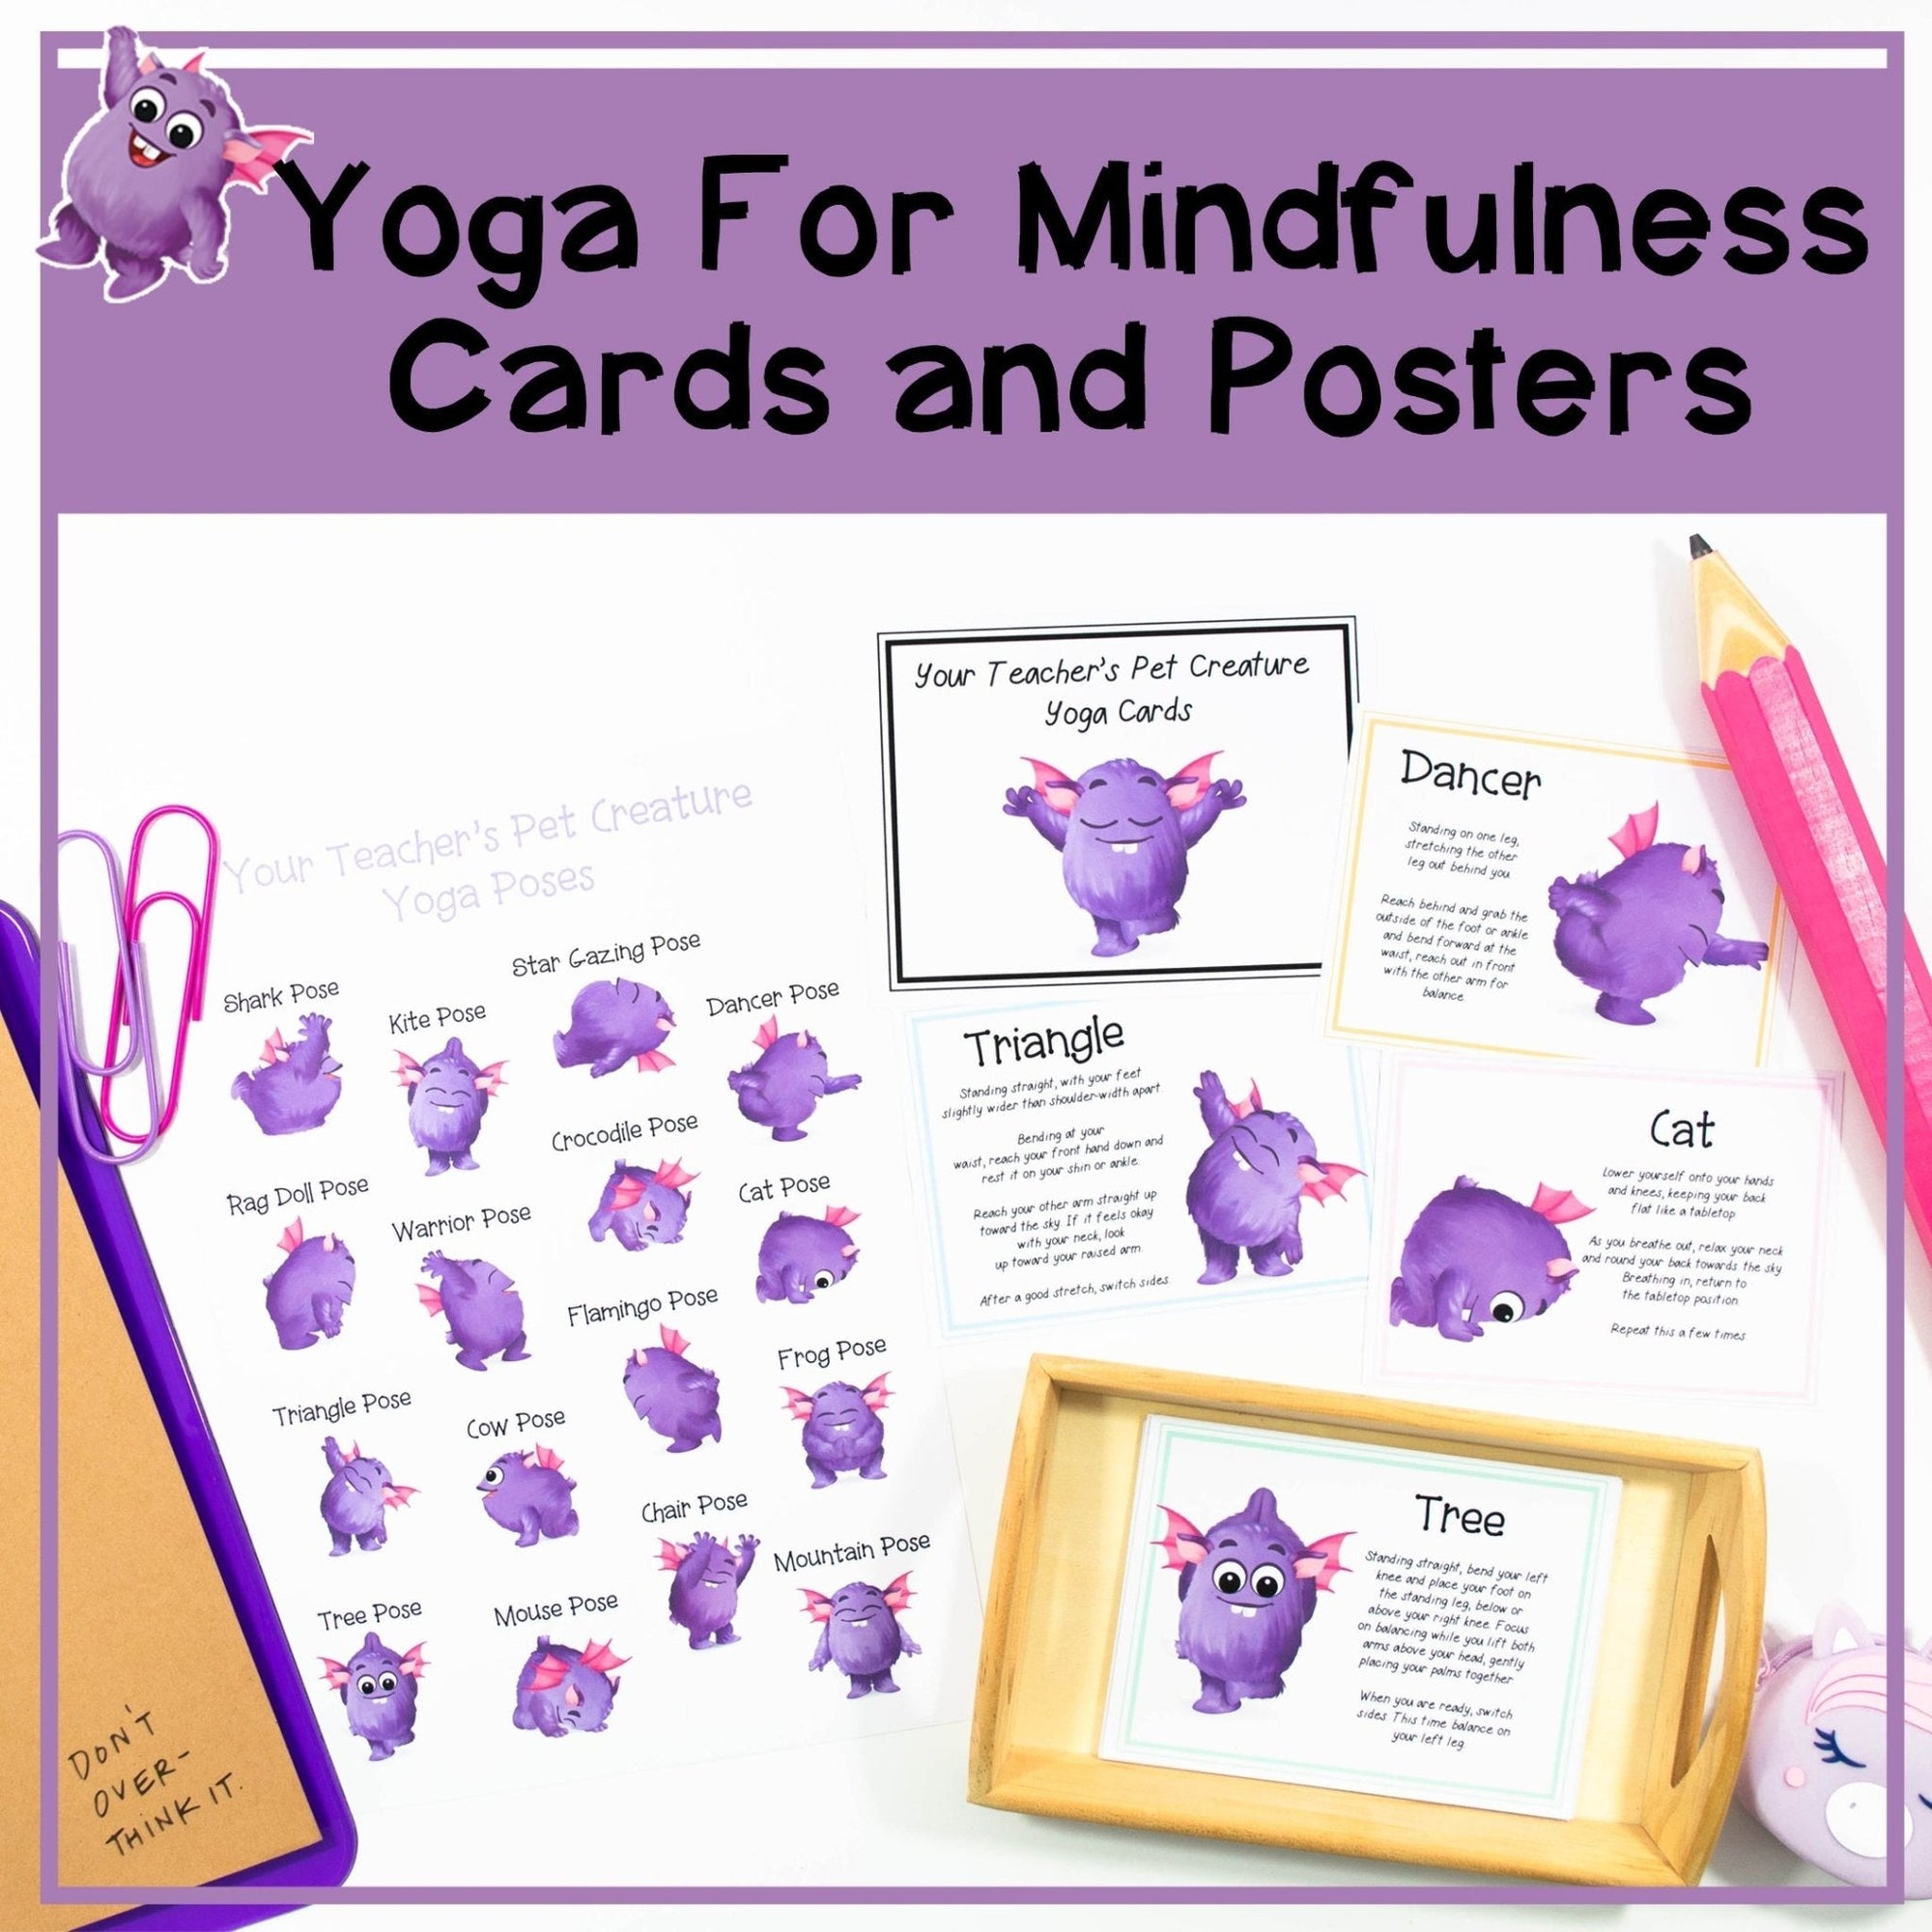 Yoga Poses Cards & Poster - Mindfulness in Early Childhood & Primary Classroom - Your Teacher's Pet Creature